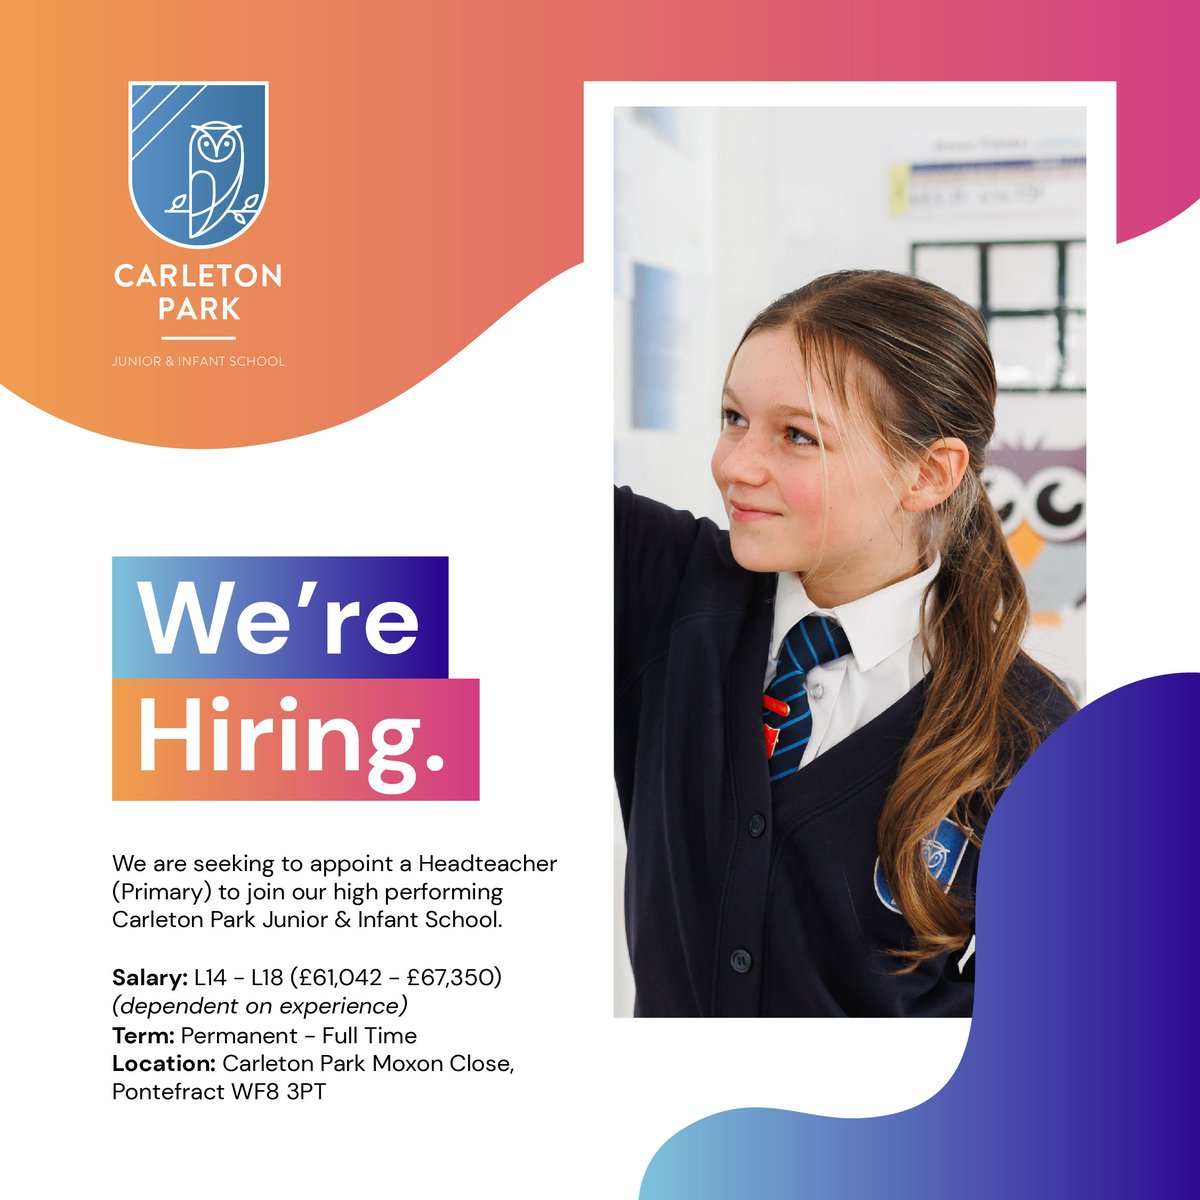 Are you an experienced leader seeking an opportunity to contribute to a values-driven Trust? We warmly encourage you to apply for the role of #Headteacher at @carletonparksch, where you can truly impact the lives of our pupils. Apply now: bit.ly/3K9QBCz #edujobs